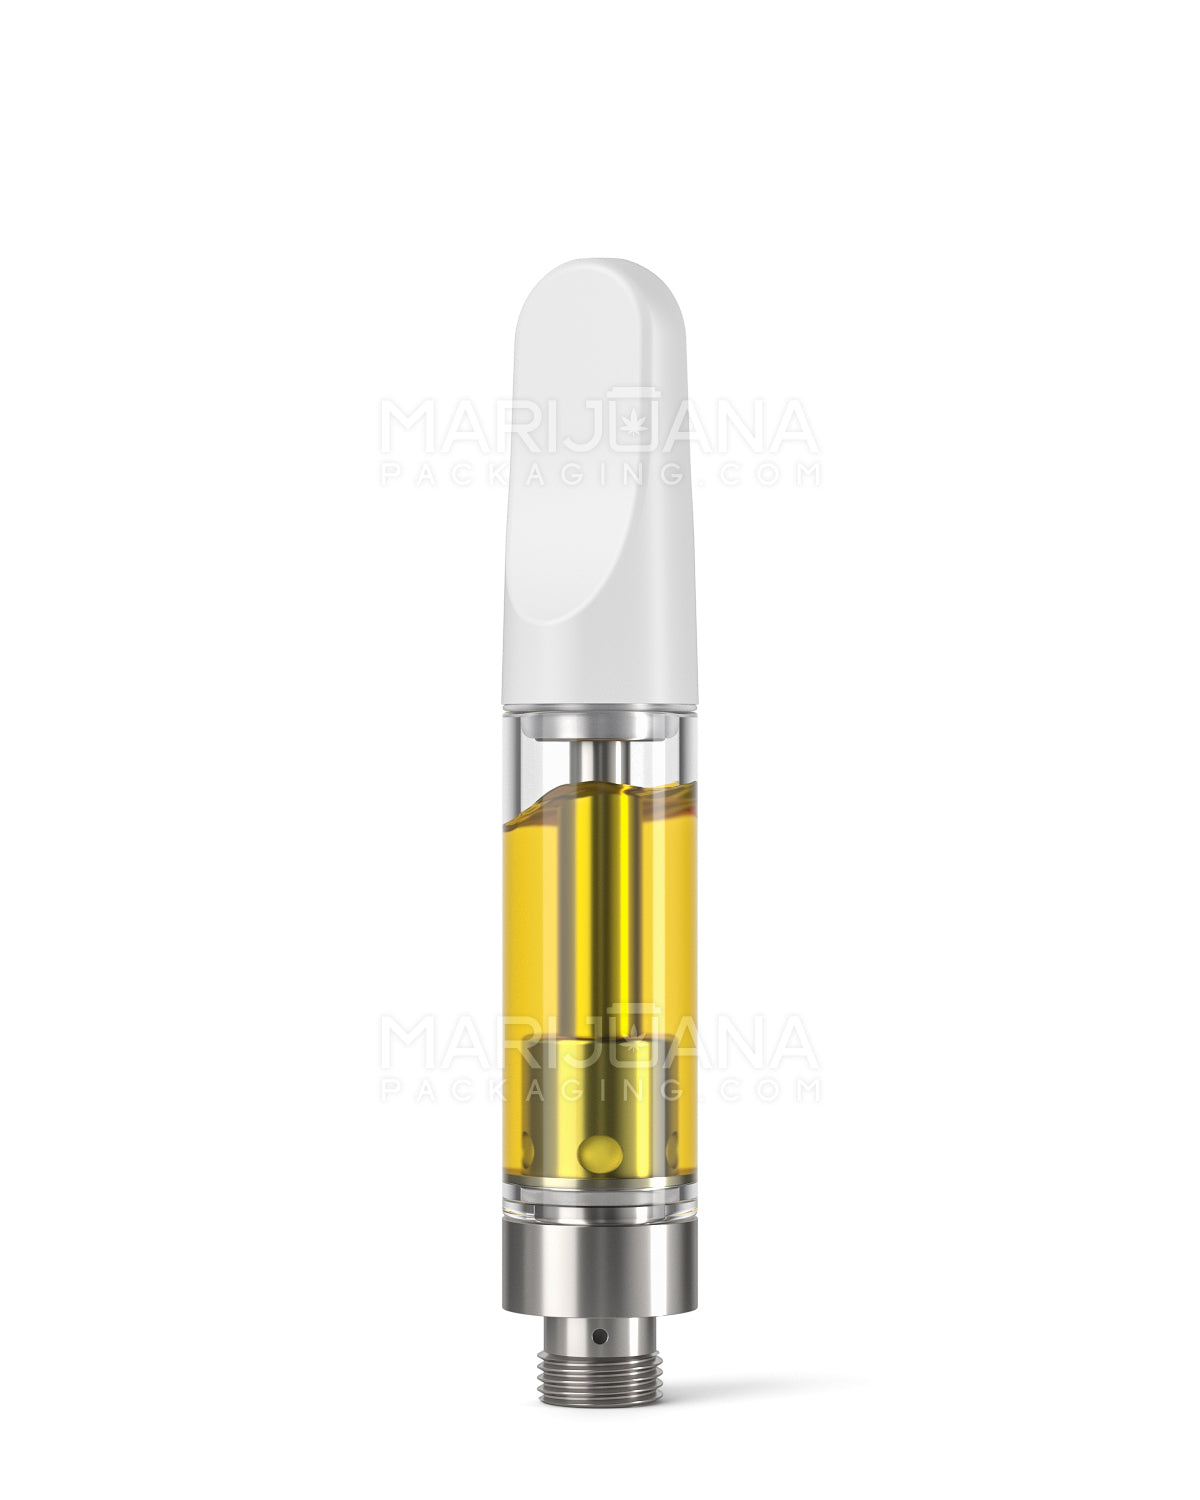 CCELL | Liquid6 Reactor Glass Vape Cartridge with White Plastic Mouthpiece | 1mL - Screw On - 100 Count - 2